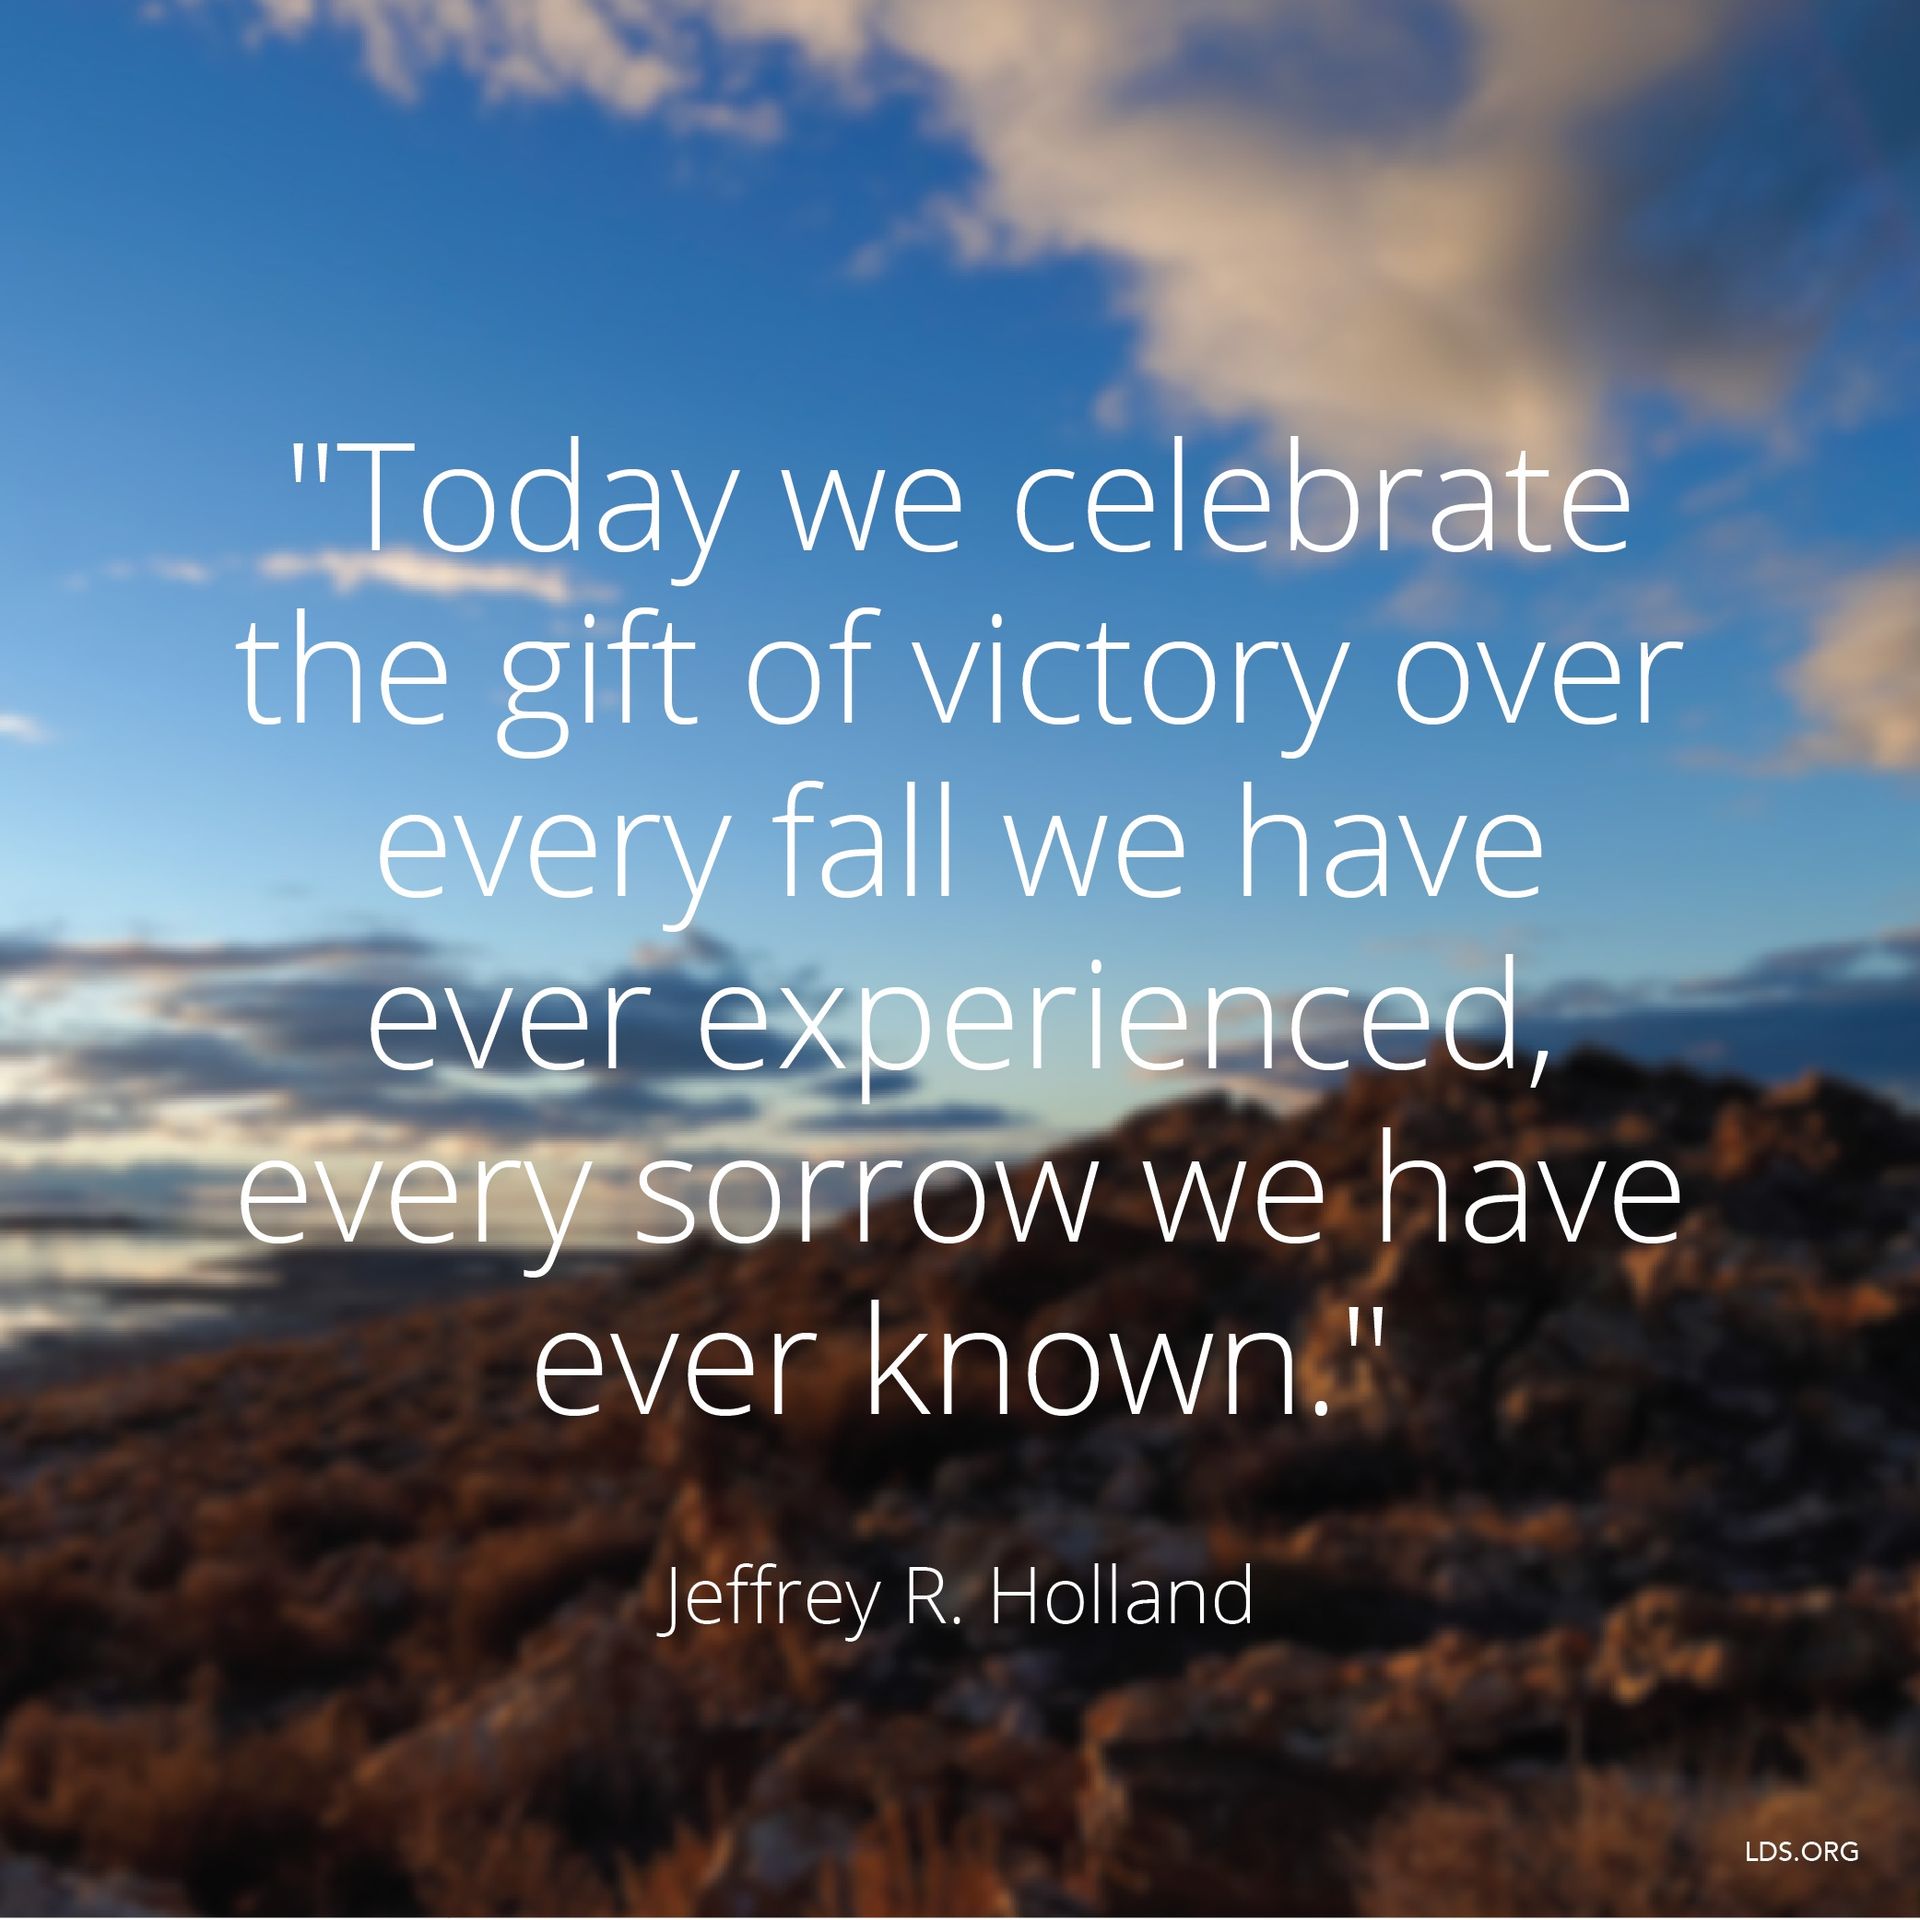 “Today we celebrate the gift of victory over every fall we have ever experienced, every sorrow we have ever known.”—Elder Jeffrey R. Holland, “Where Justice, Love, and Mercy Meet” © undefined ipCode 1.